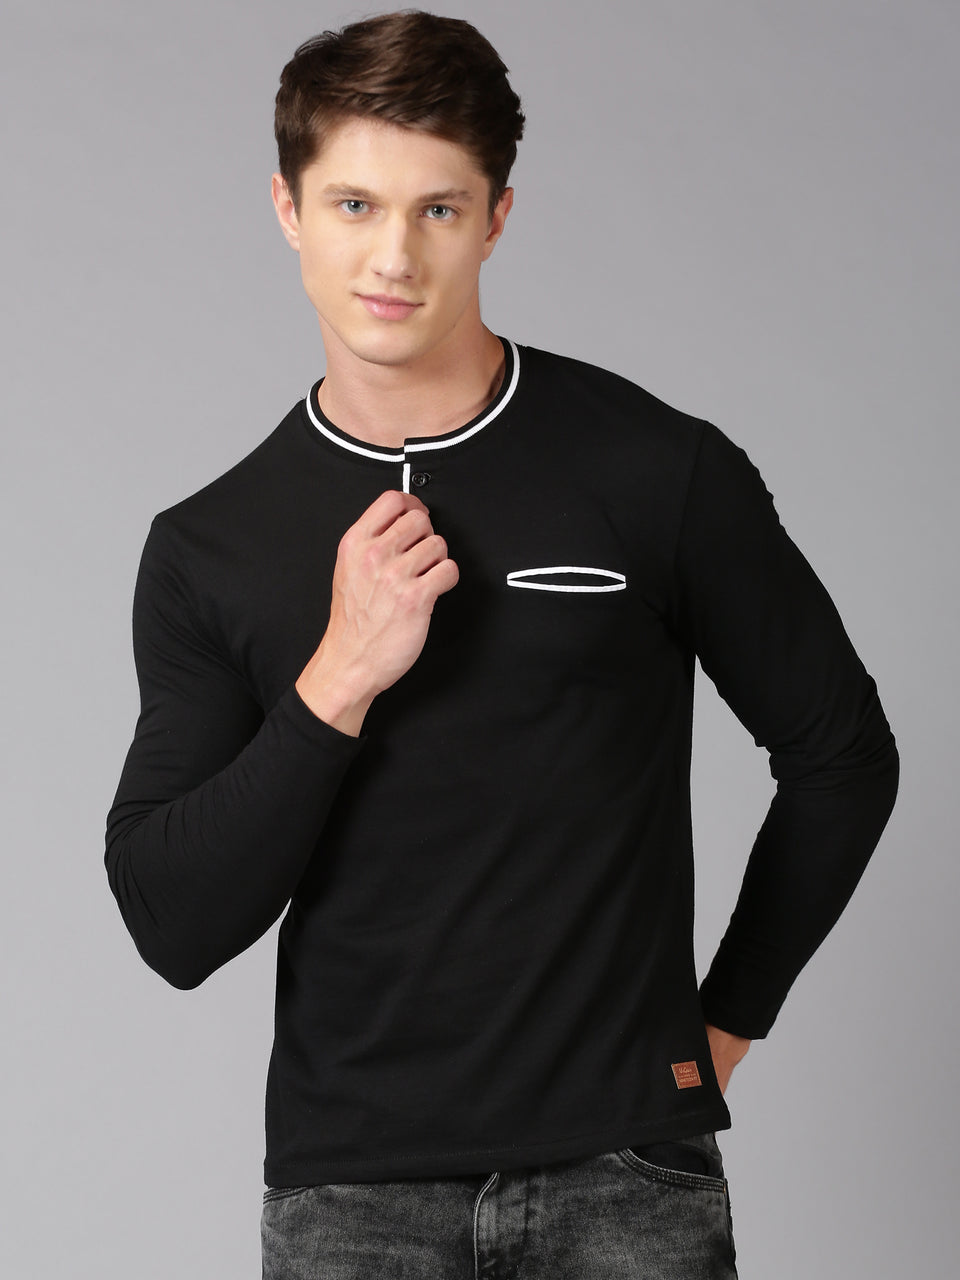 Men Black Plain Solid Trendy Neck Recycled Cotton Full Sleeve Regular Fit Casual T-Shirt with Pocket